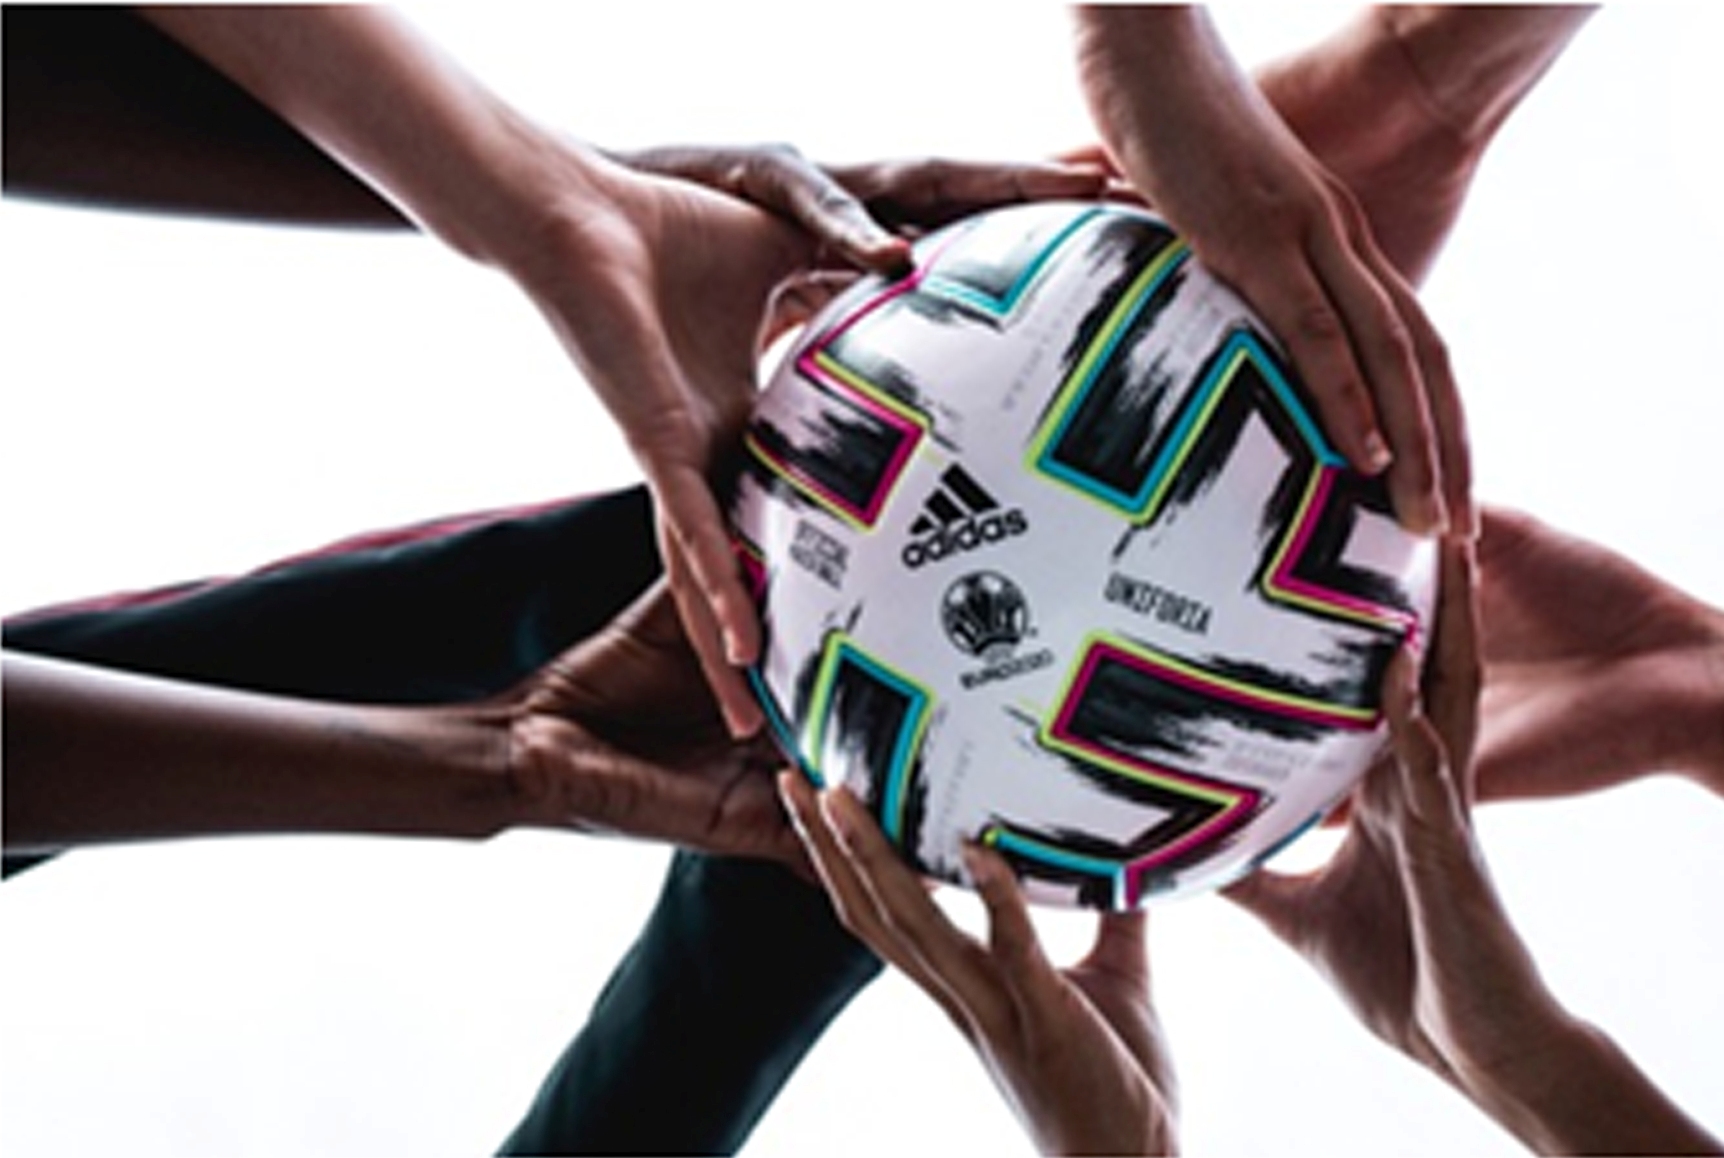 adidas-celebrates-unity-with-the-unveil-of-uniforia-the-official-match-ball-for-uefa-euro2020tm